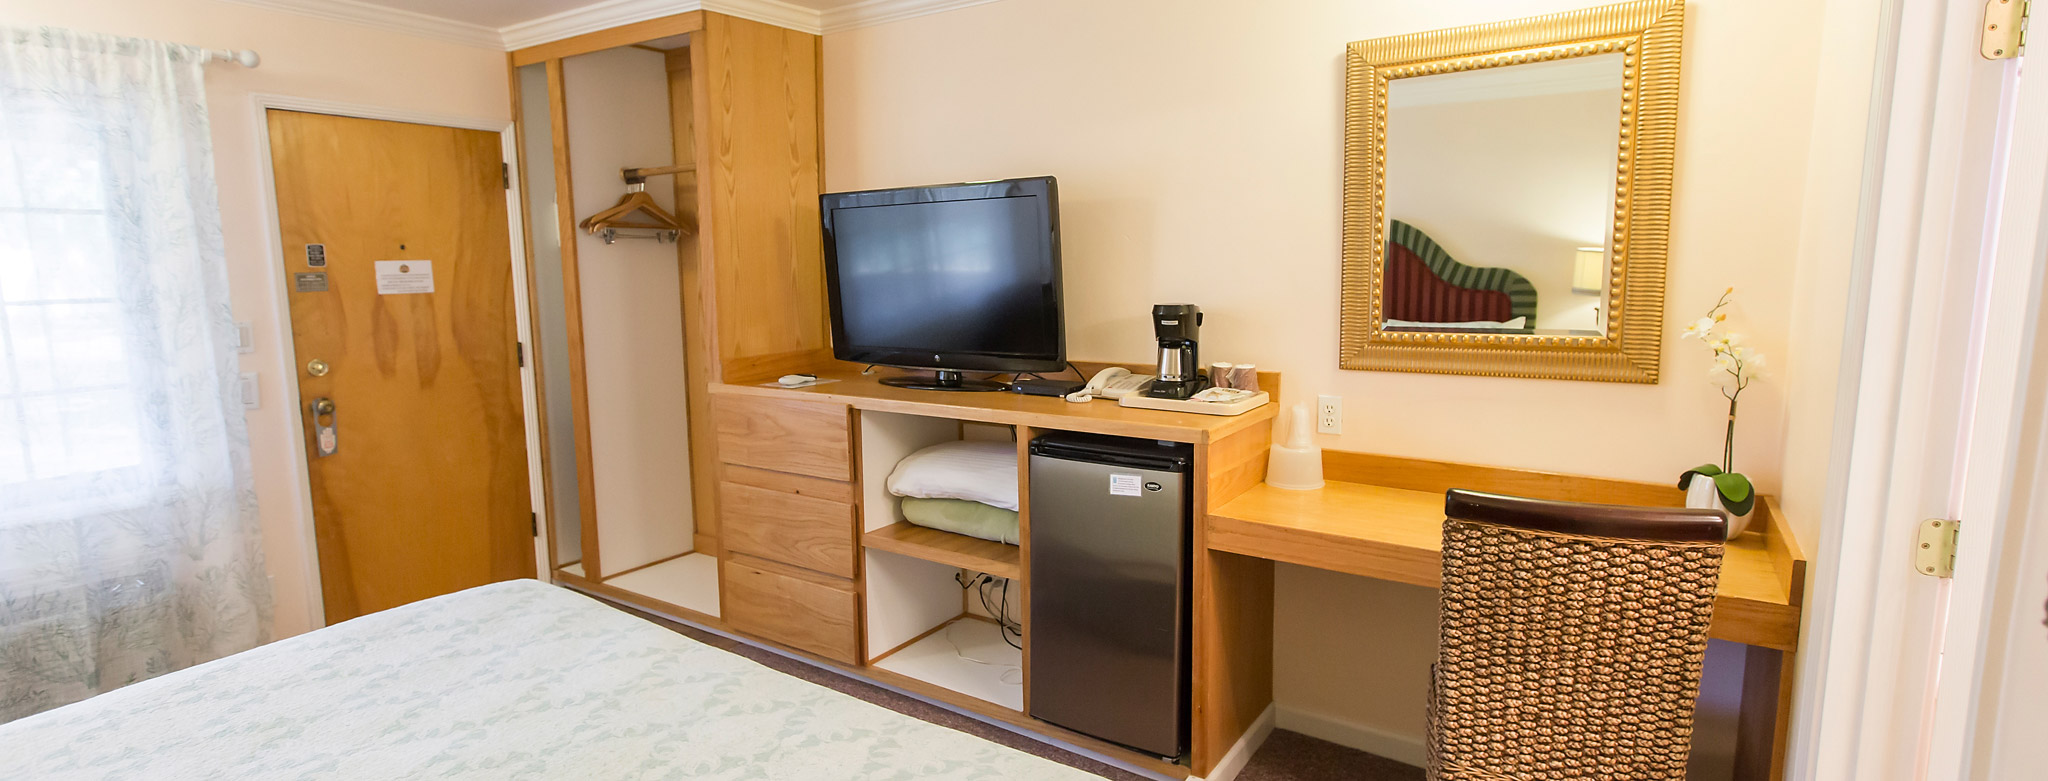 Bright and clean rooms with mini fridge, wardrobe, vanity, coffee maker and more.